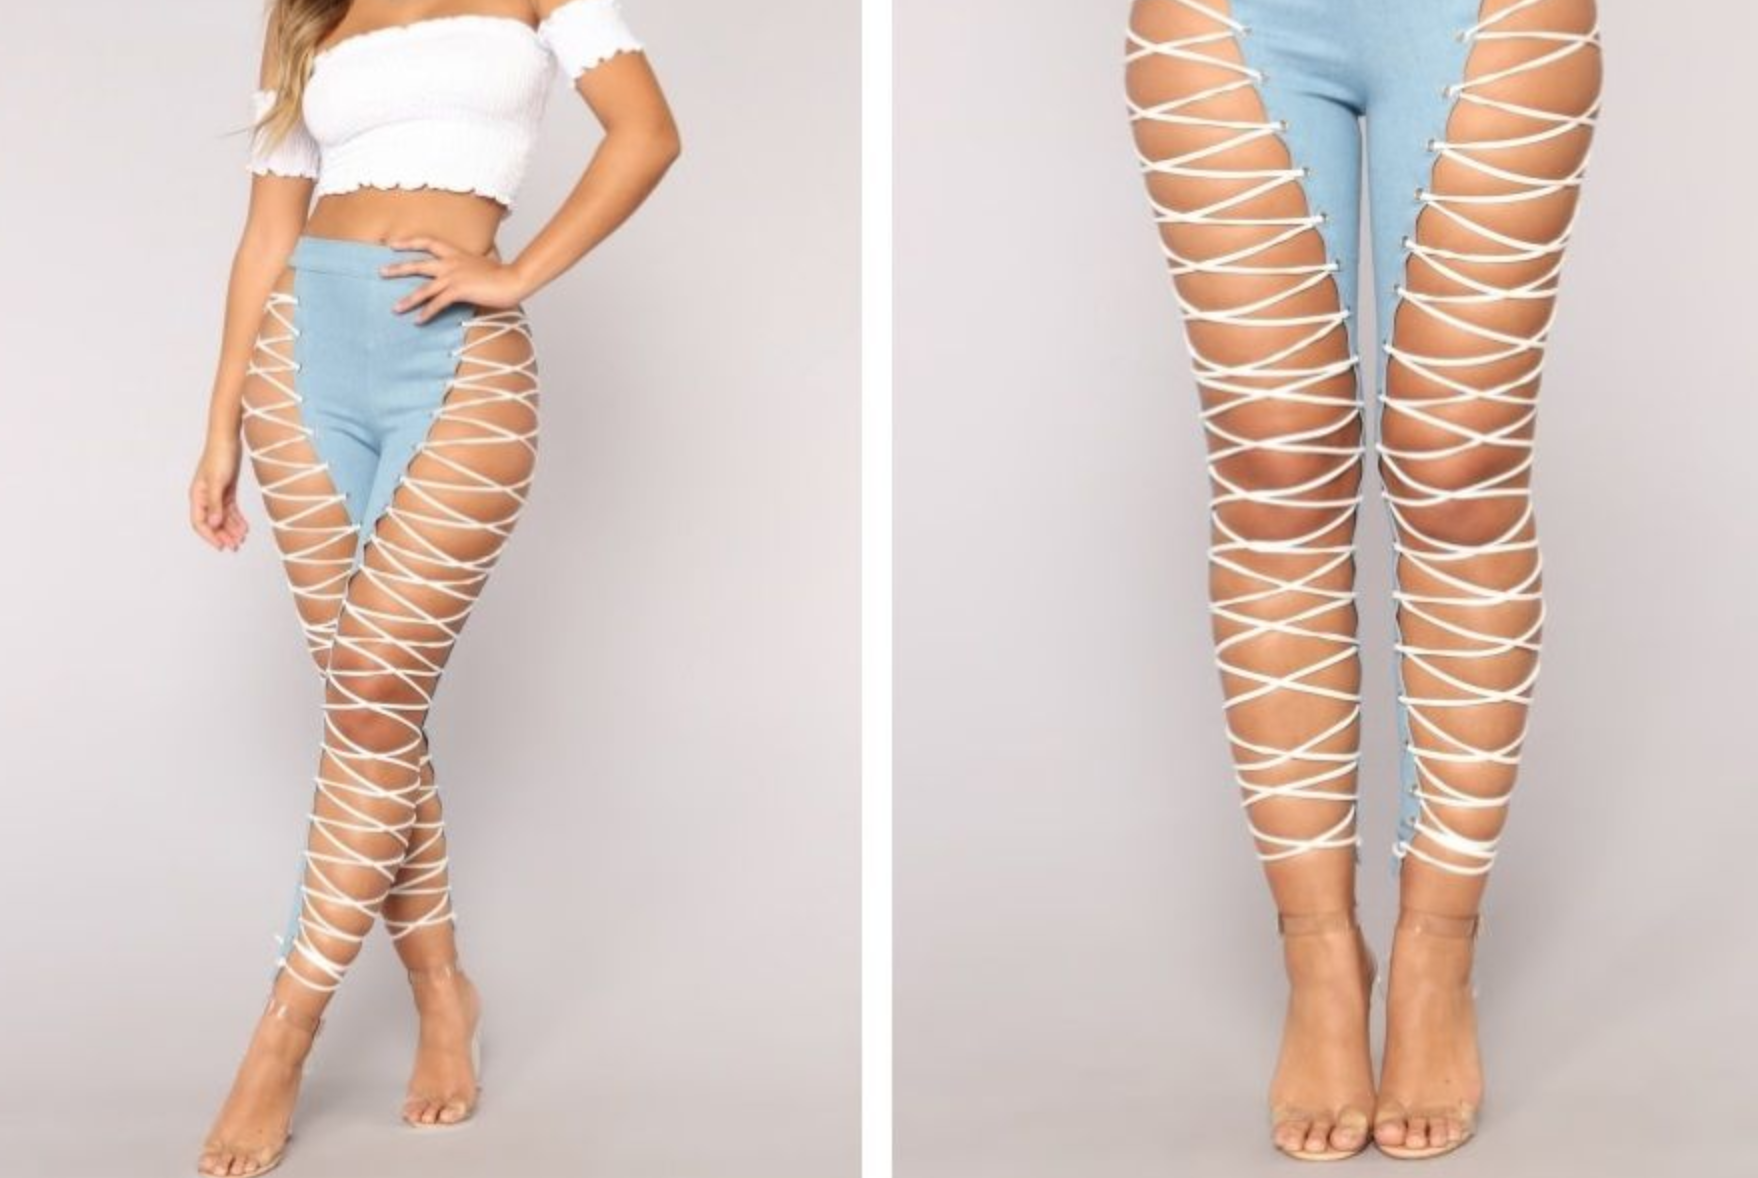 Shoppers are having a hard time with these lace-up jeans pic